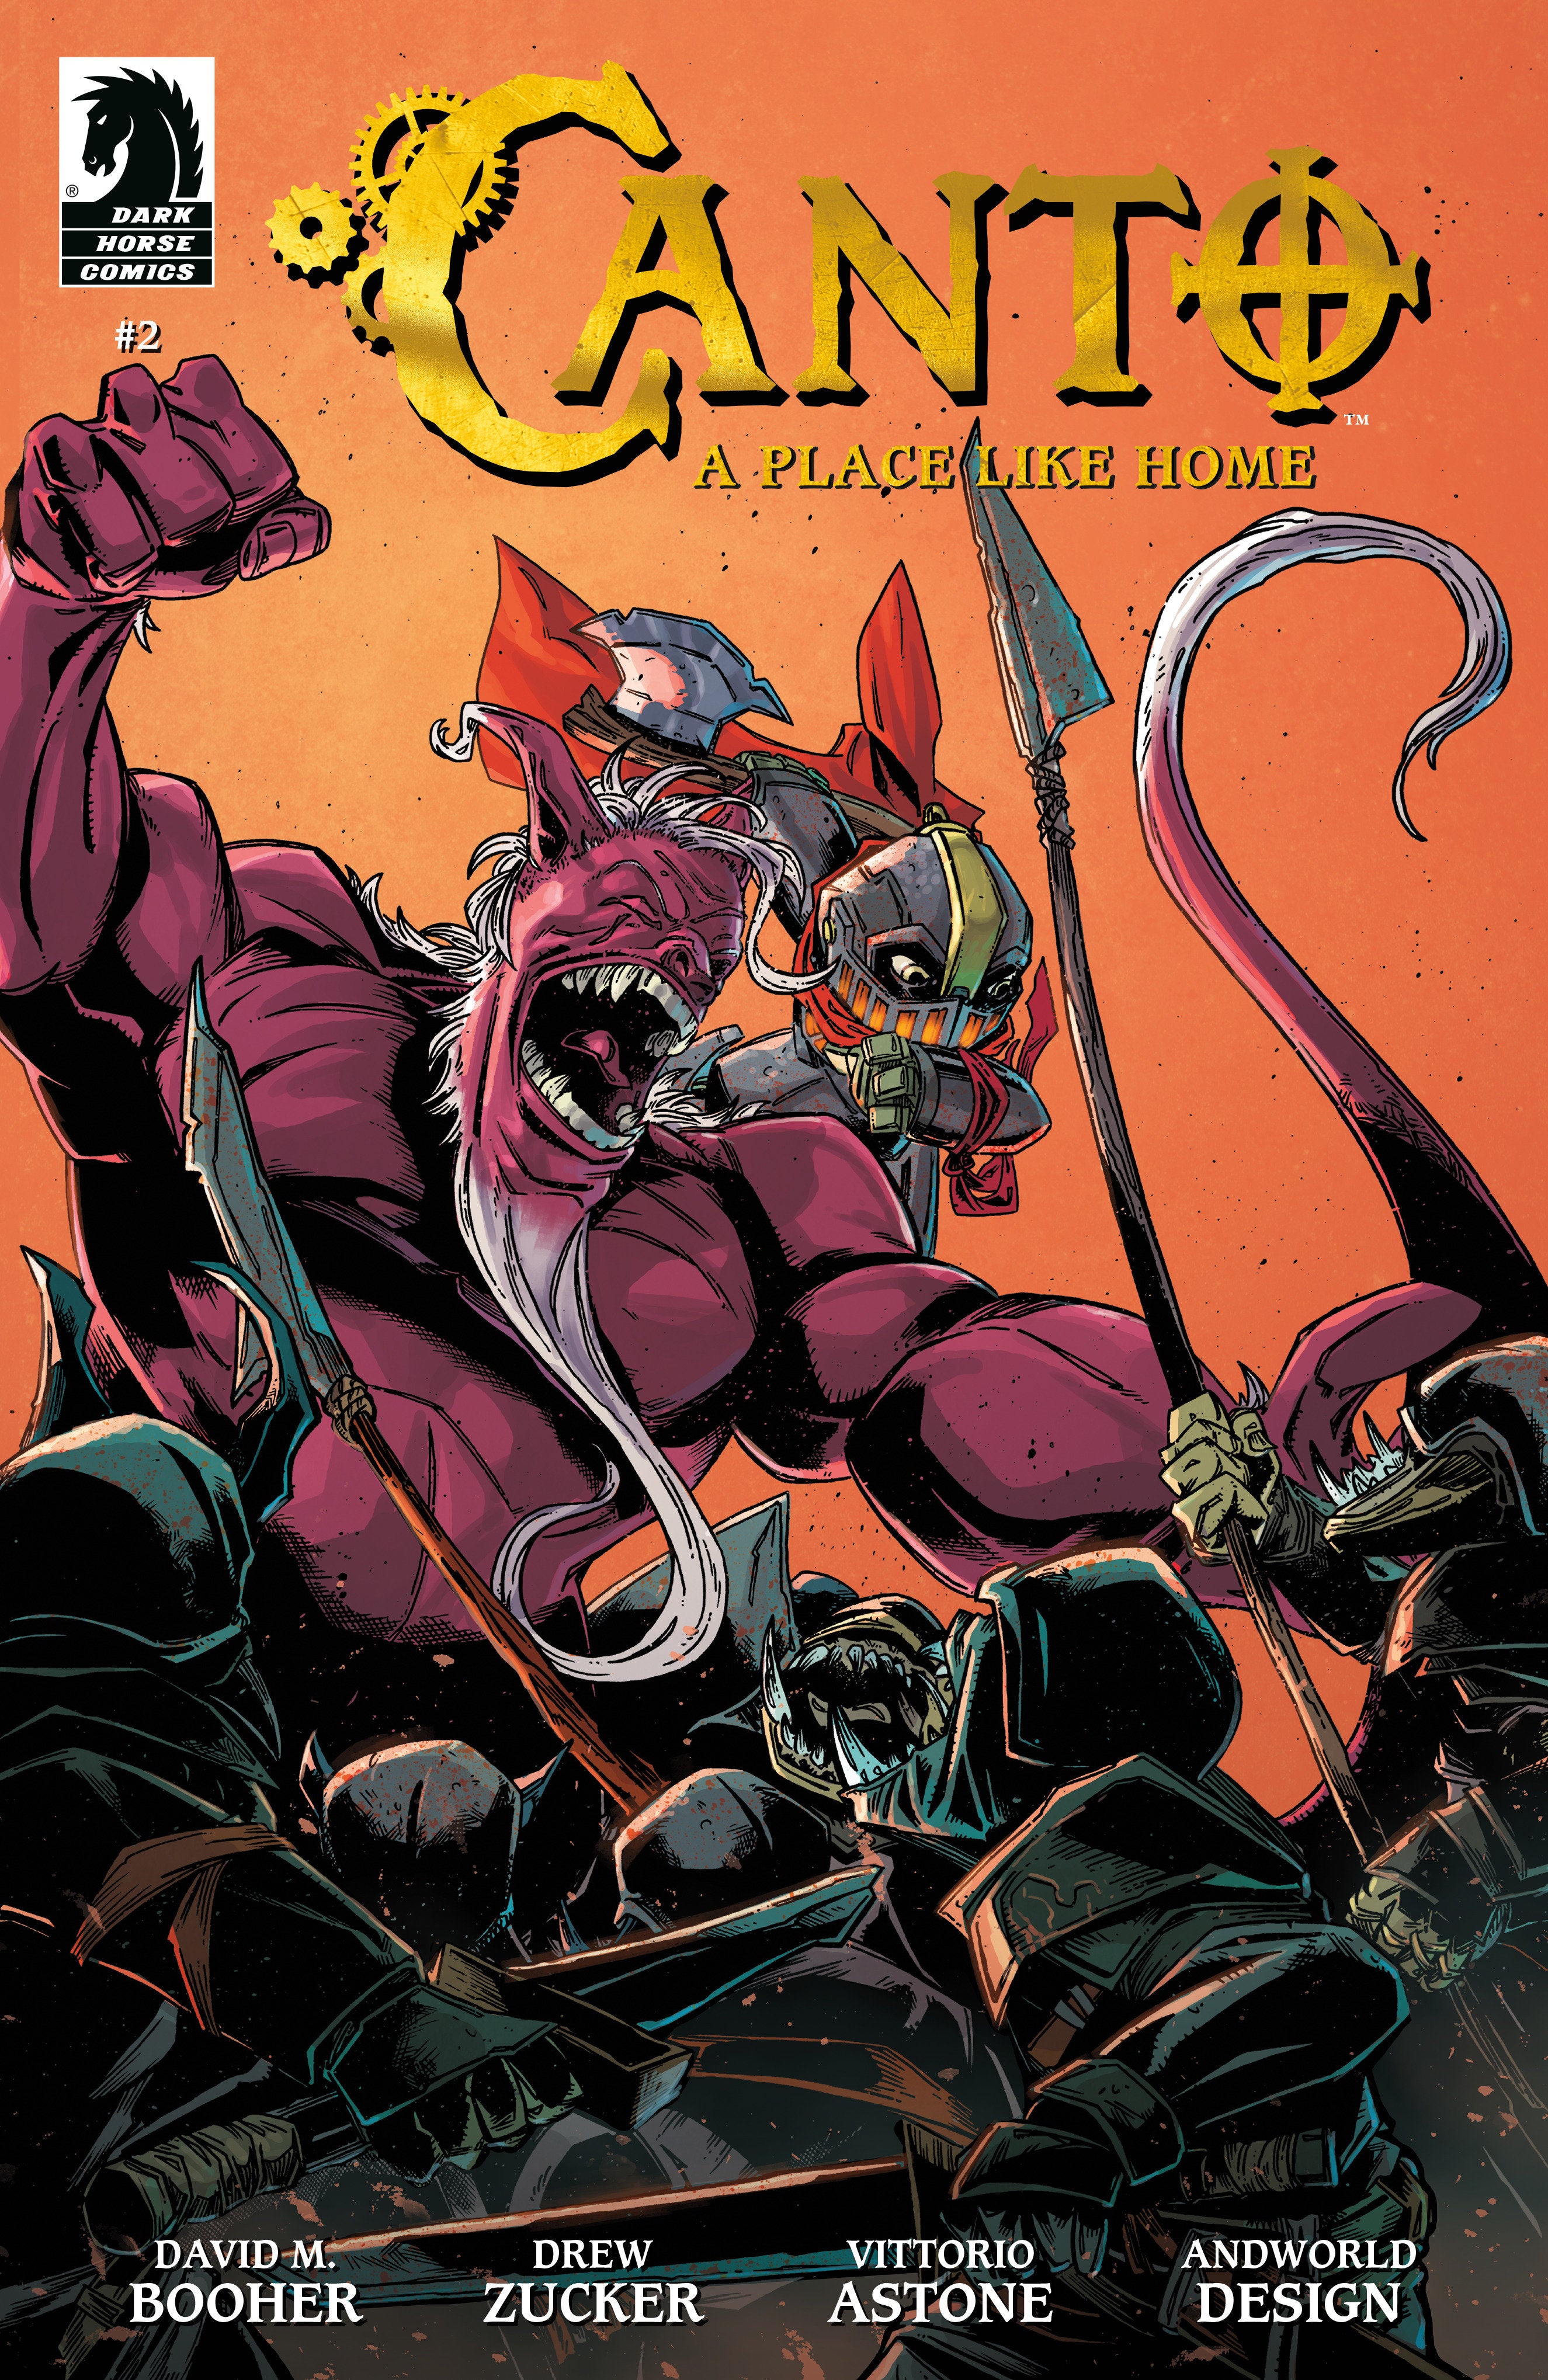 Canto: A Place Like Home #2 (Cover A) (Drew Zucker)